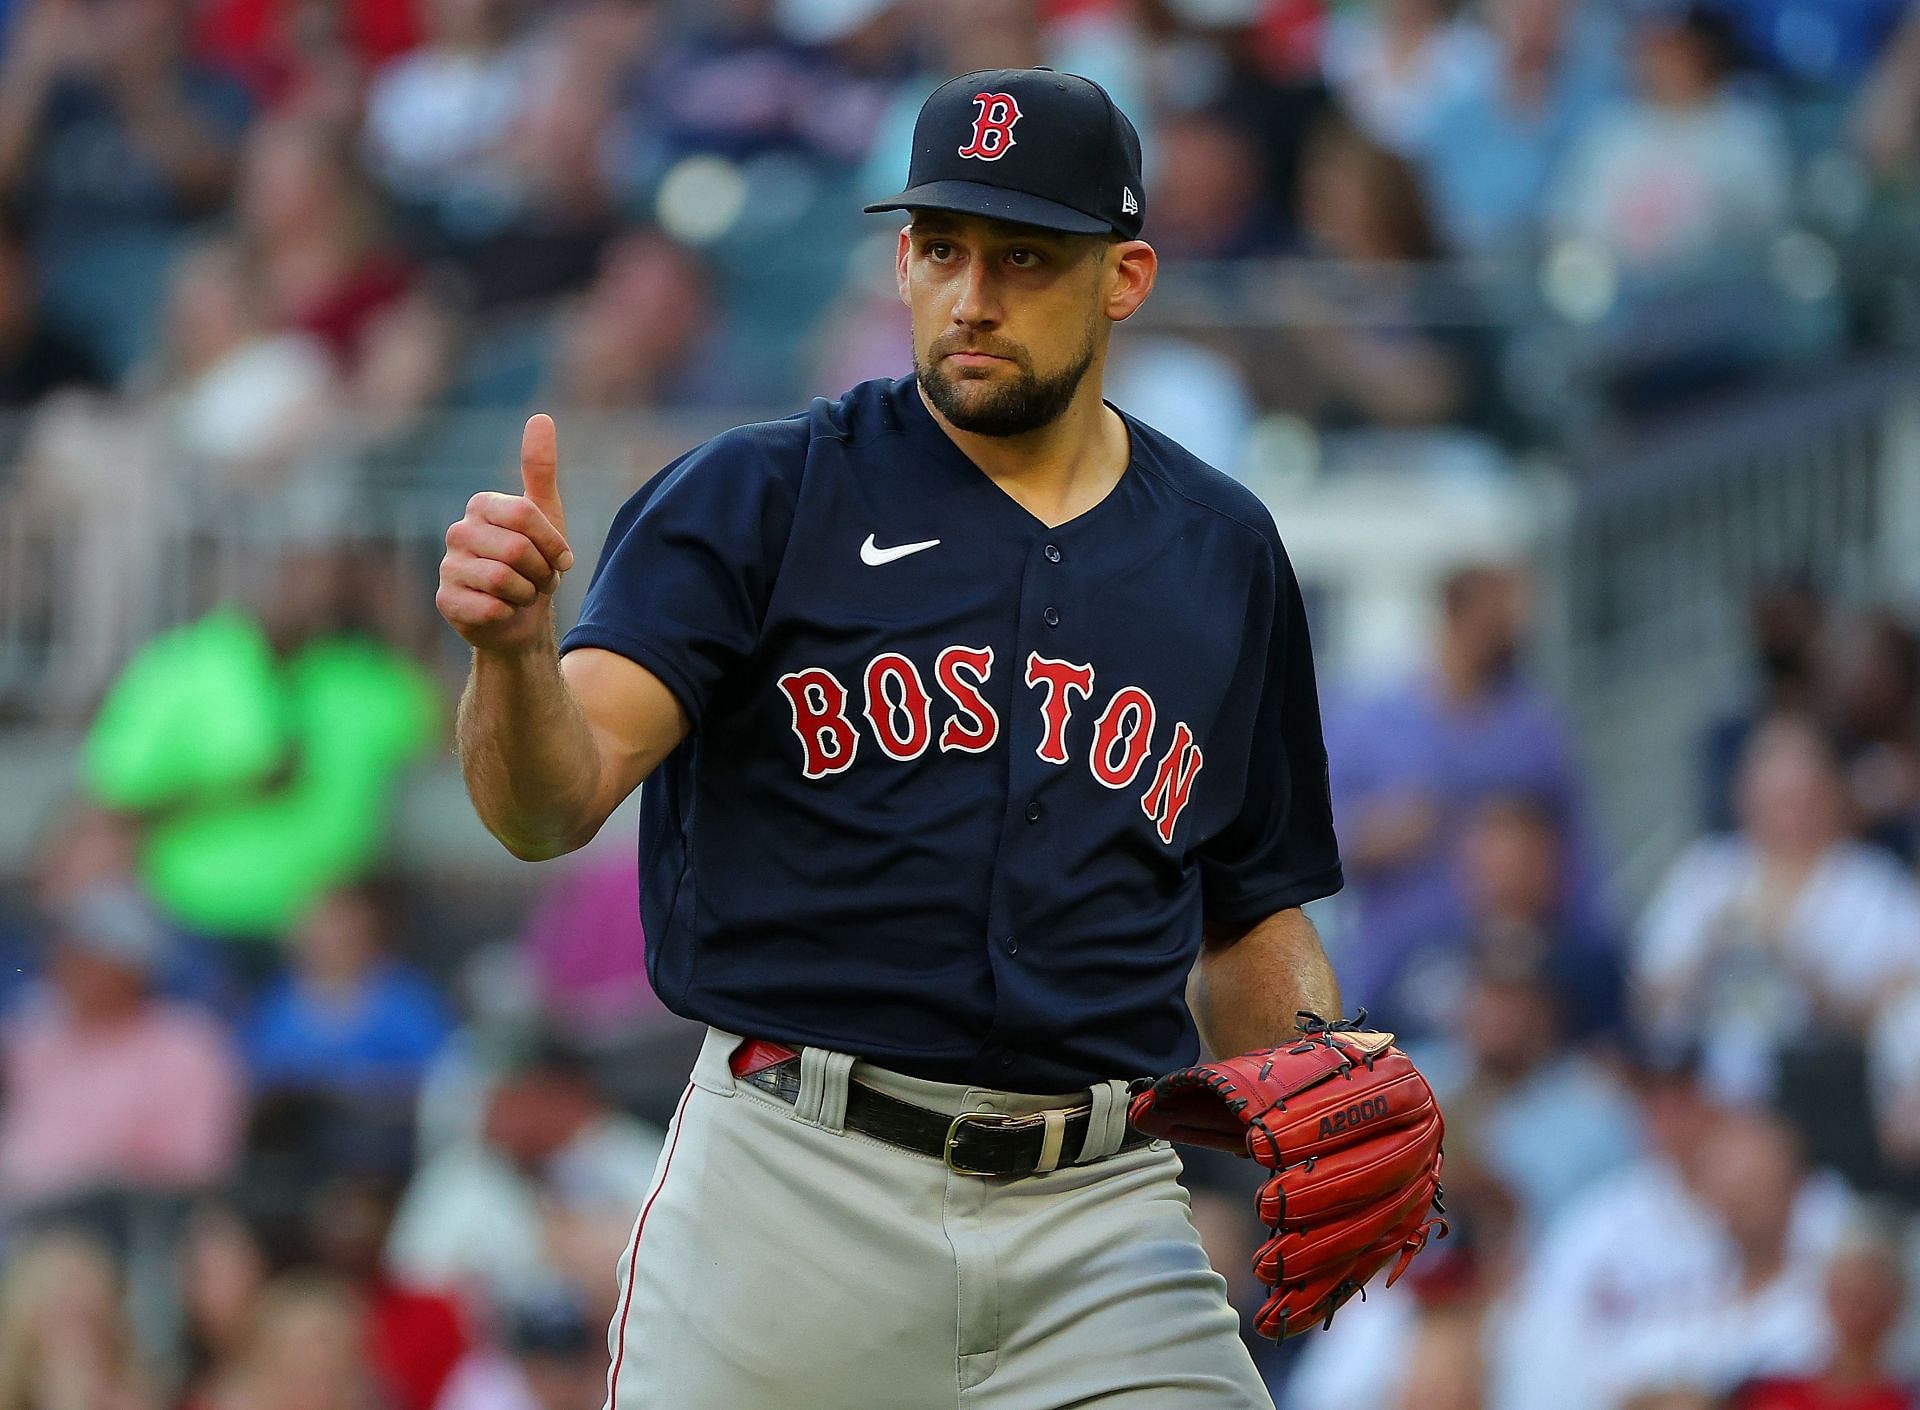 Rangers to Sign Free Agent Pitcher Nathan Eovaldi, per Report